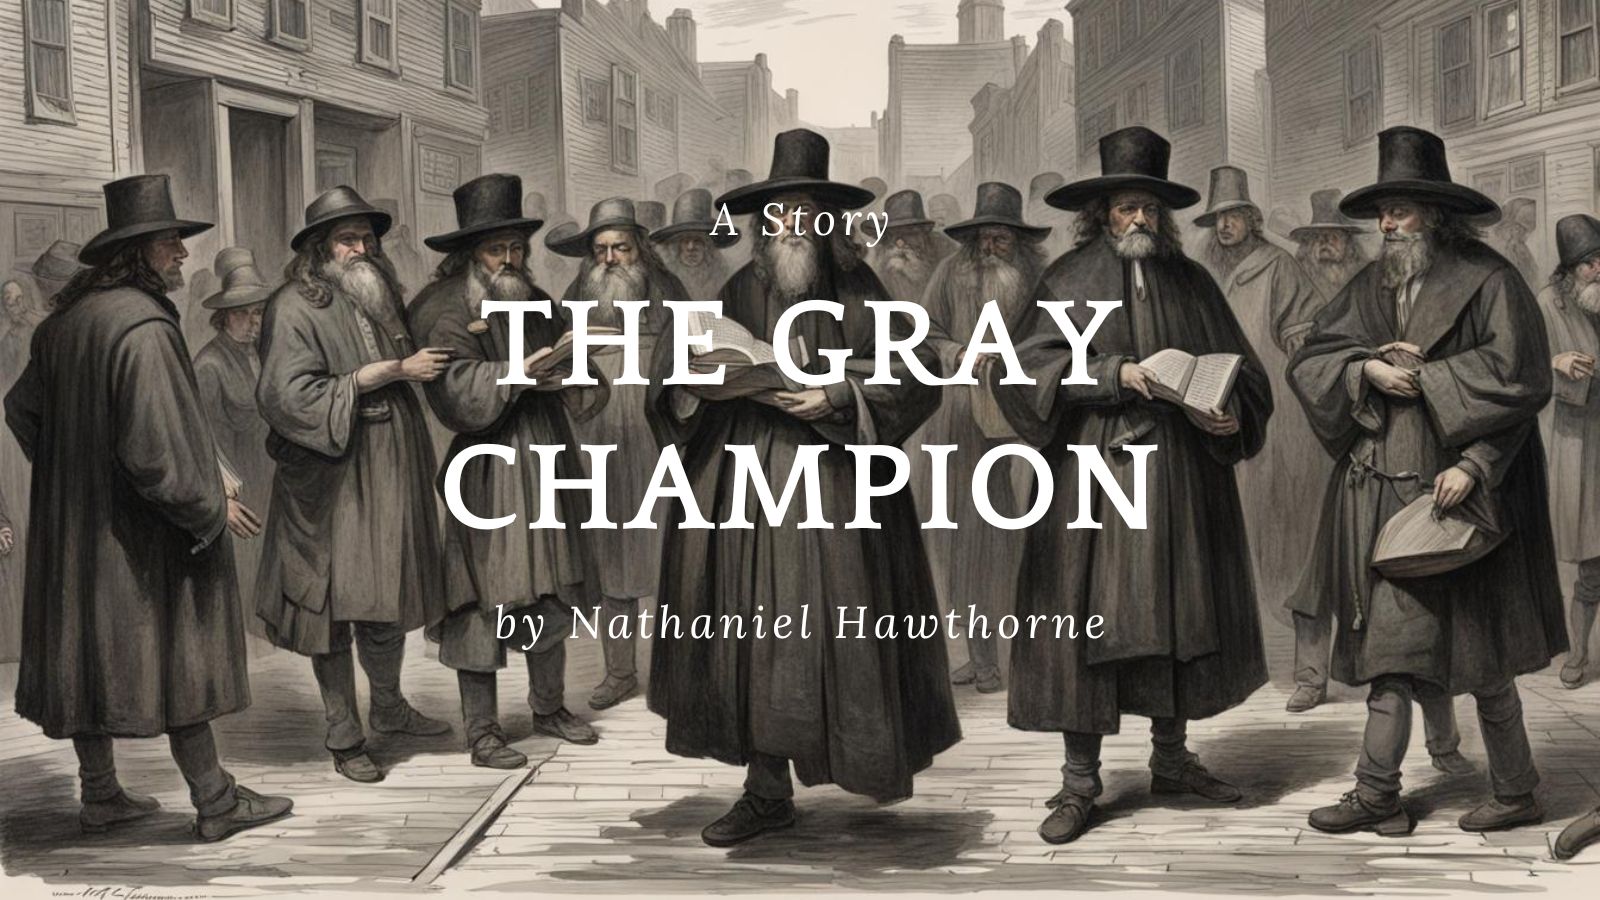 The Gray Champion  by Nathaniel Hawthorne